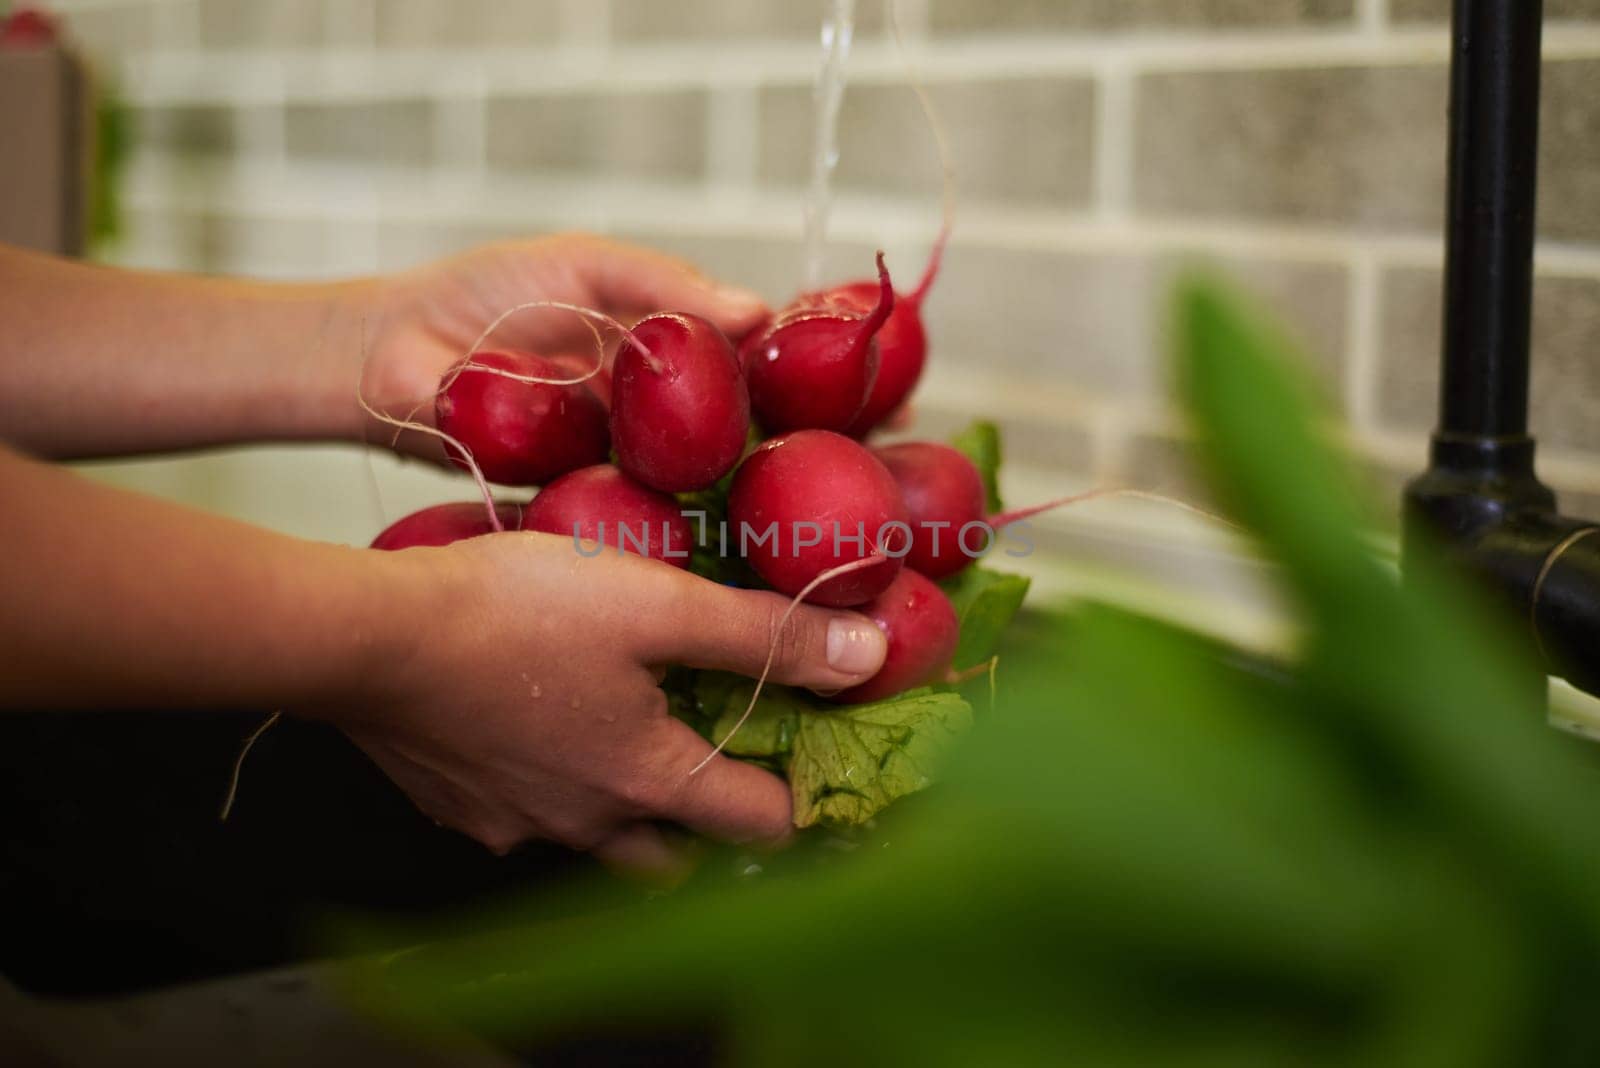 Close-up view of hands washing fresh radish in the sink under flowing water. Side view by artgf